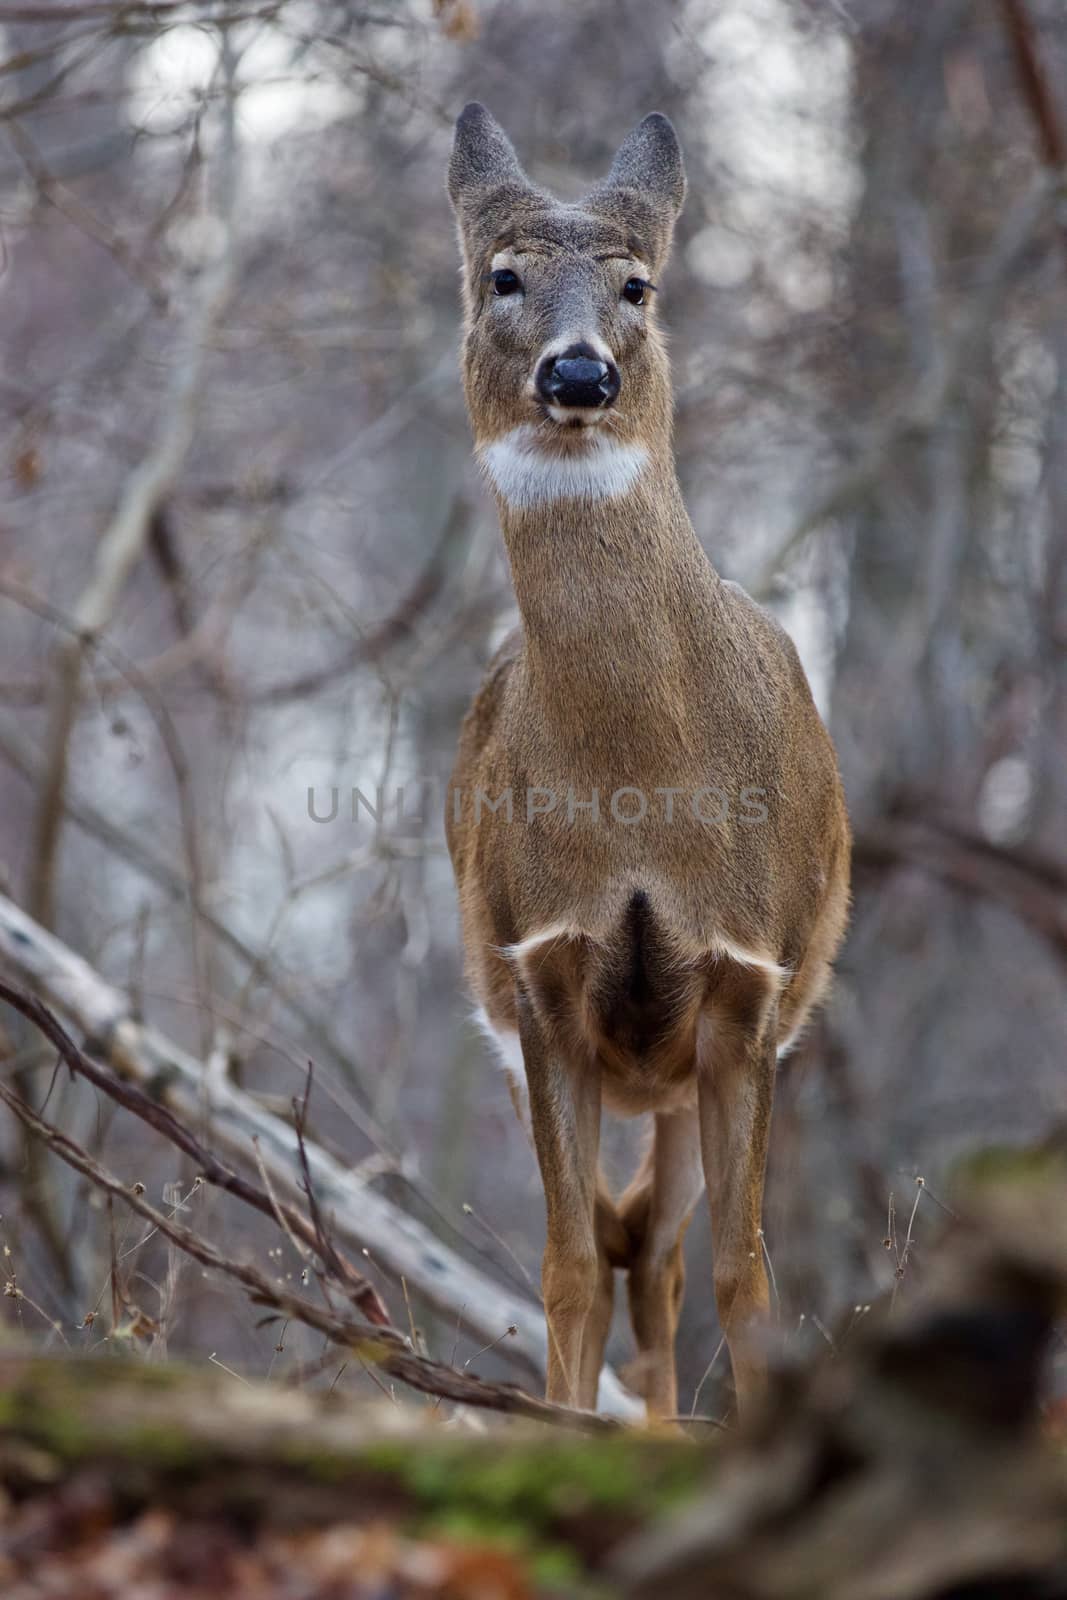 Beautiful photo of a wild deer in the forest